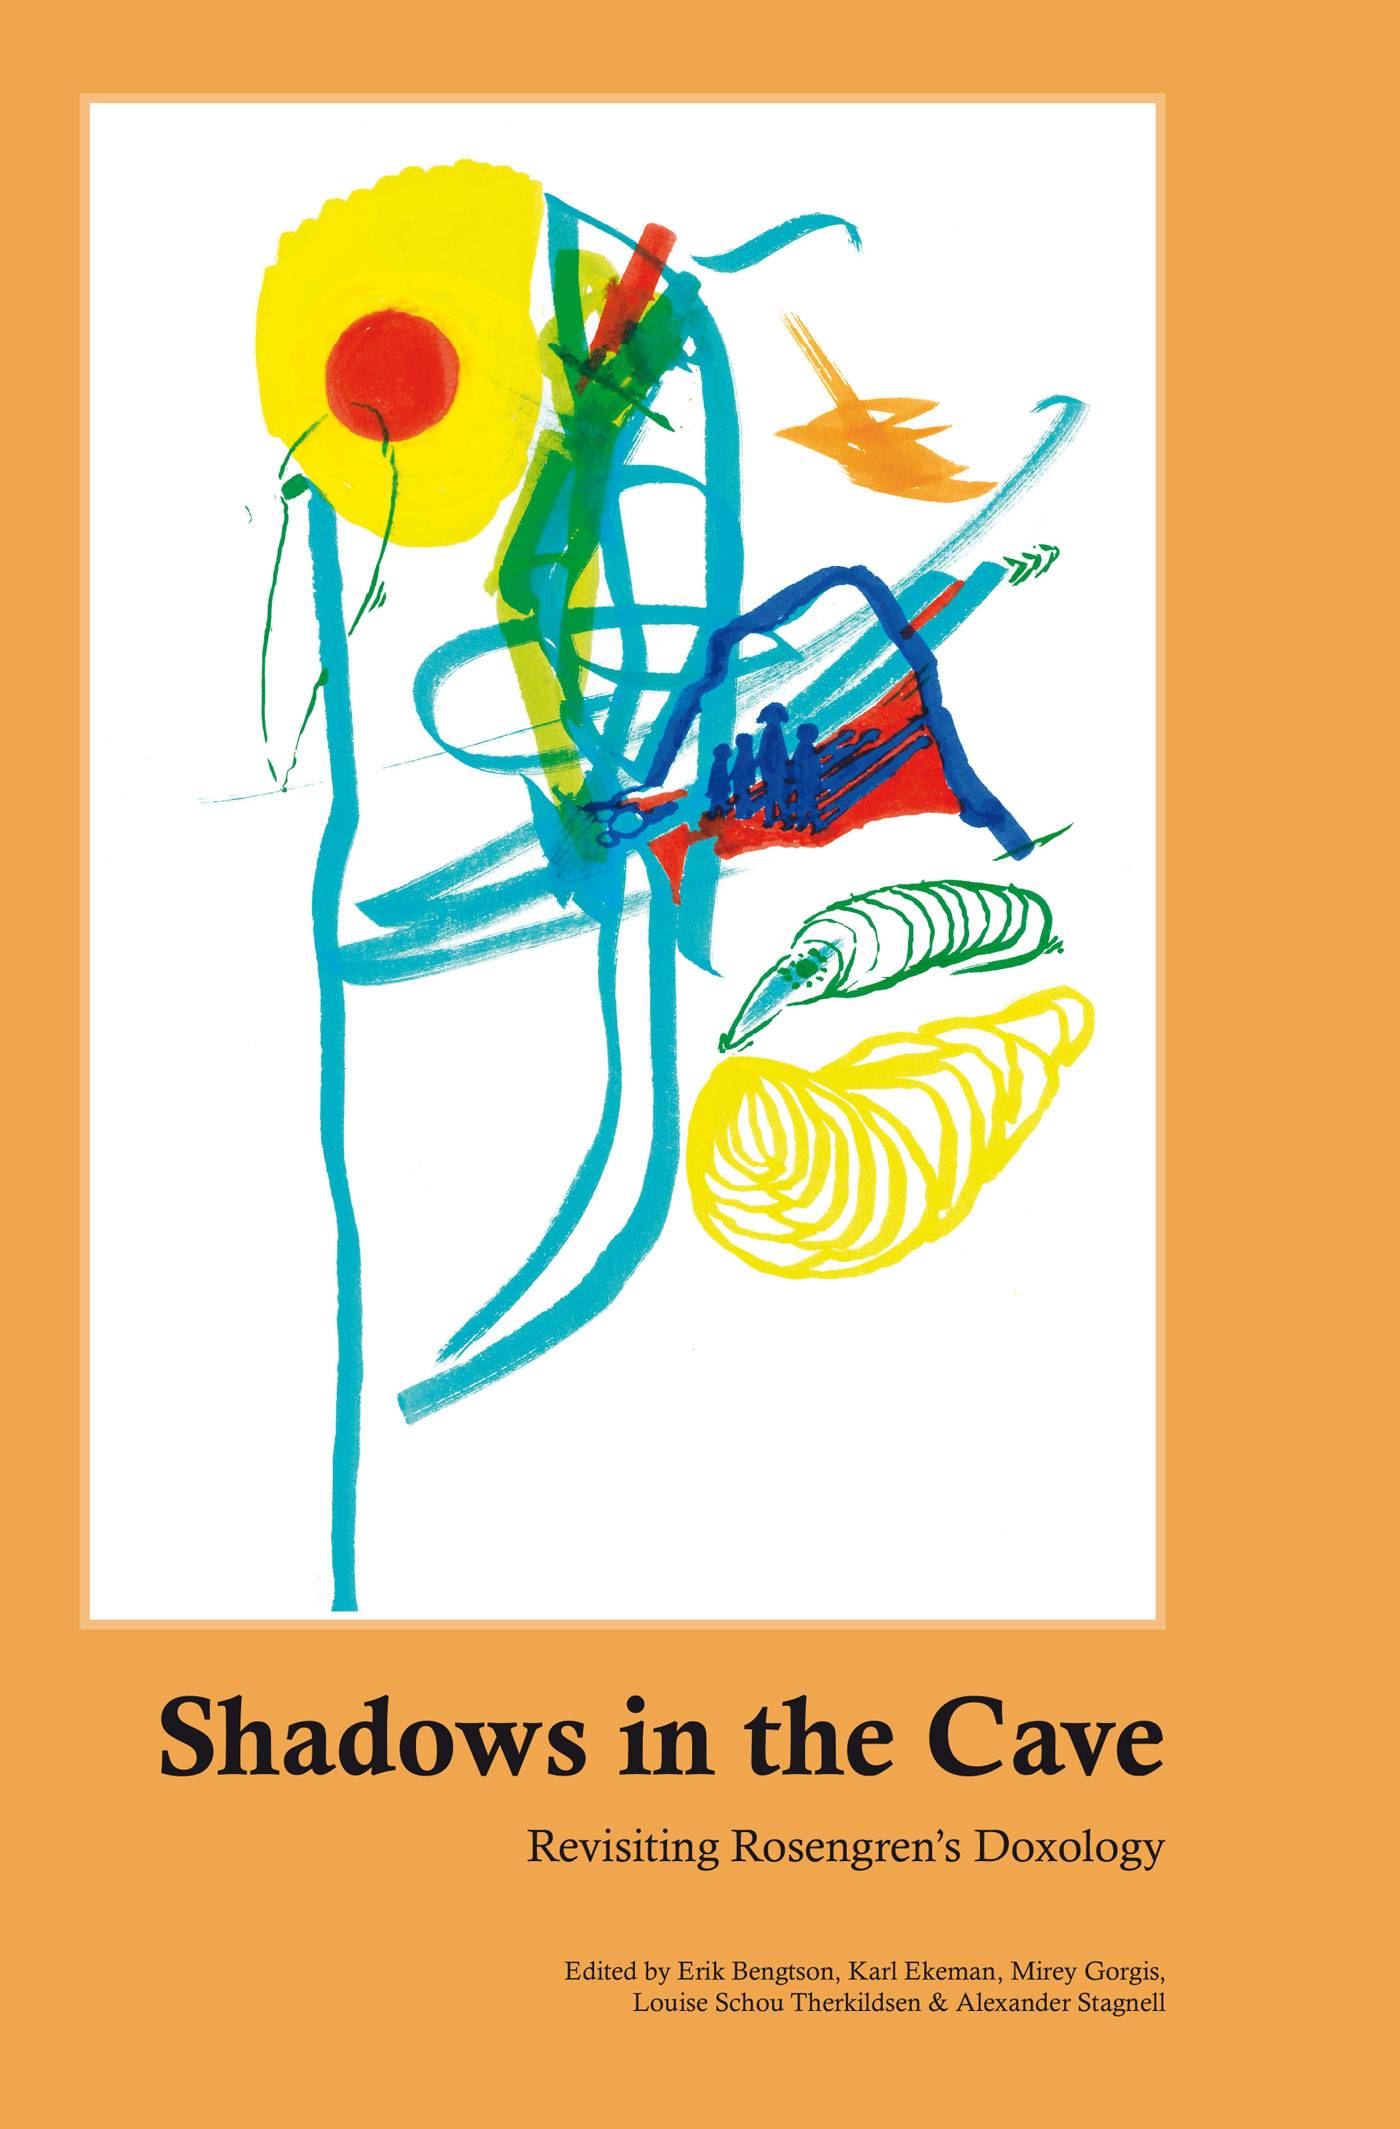 Shadows in the cave : revisiting Rosengren’s doxology